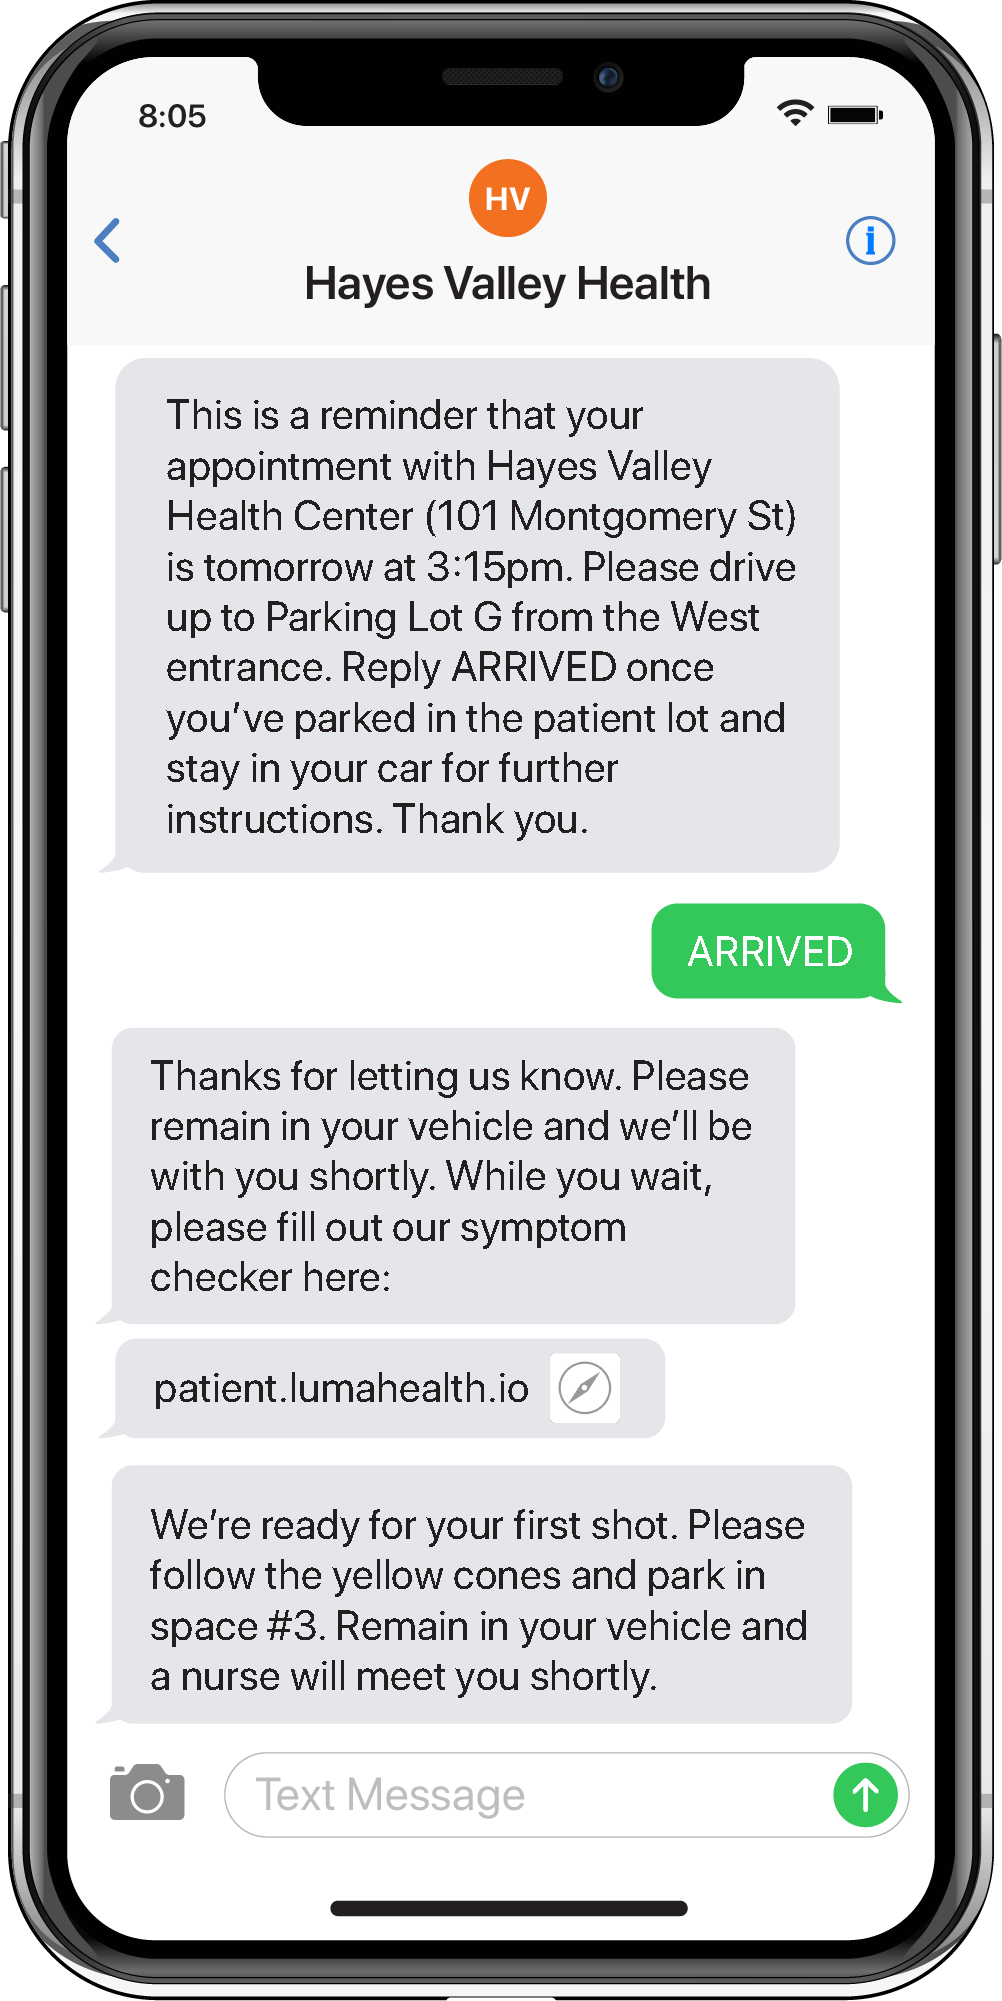 Patientu2019s Zero Contact Waiting Room and Check-in experience with Luma Health.